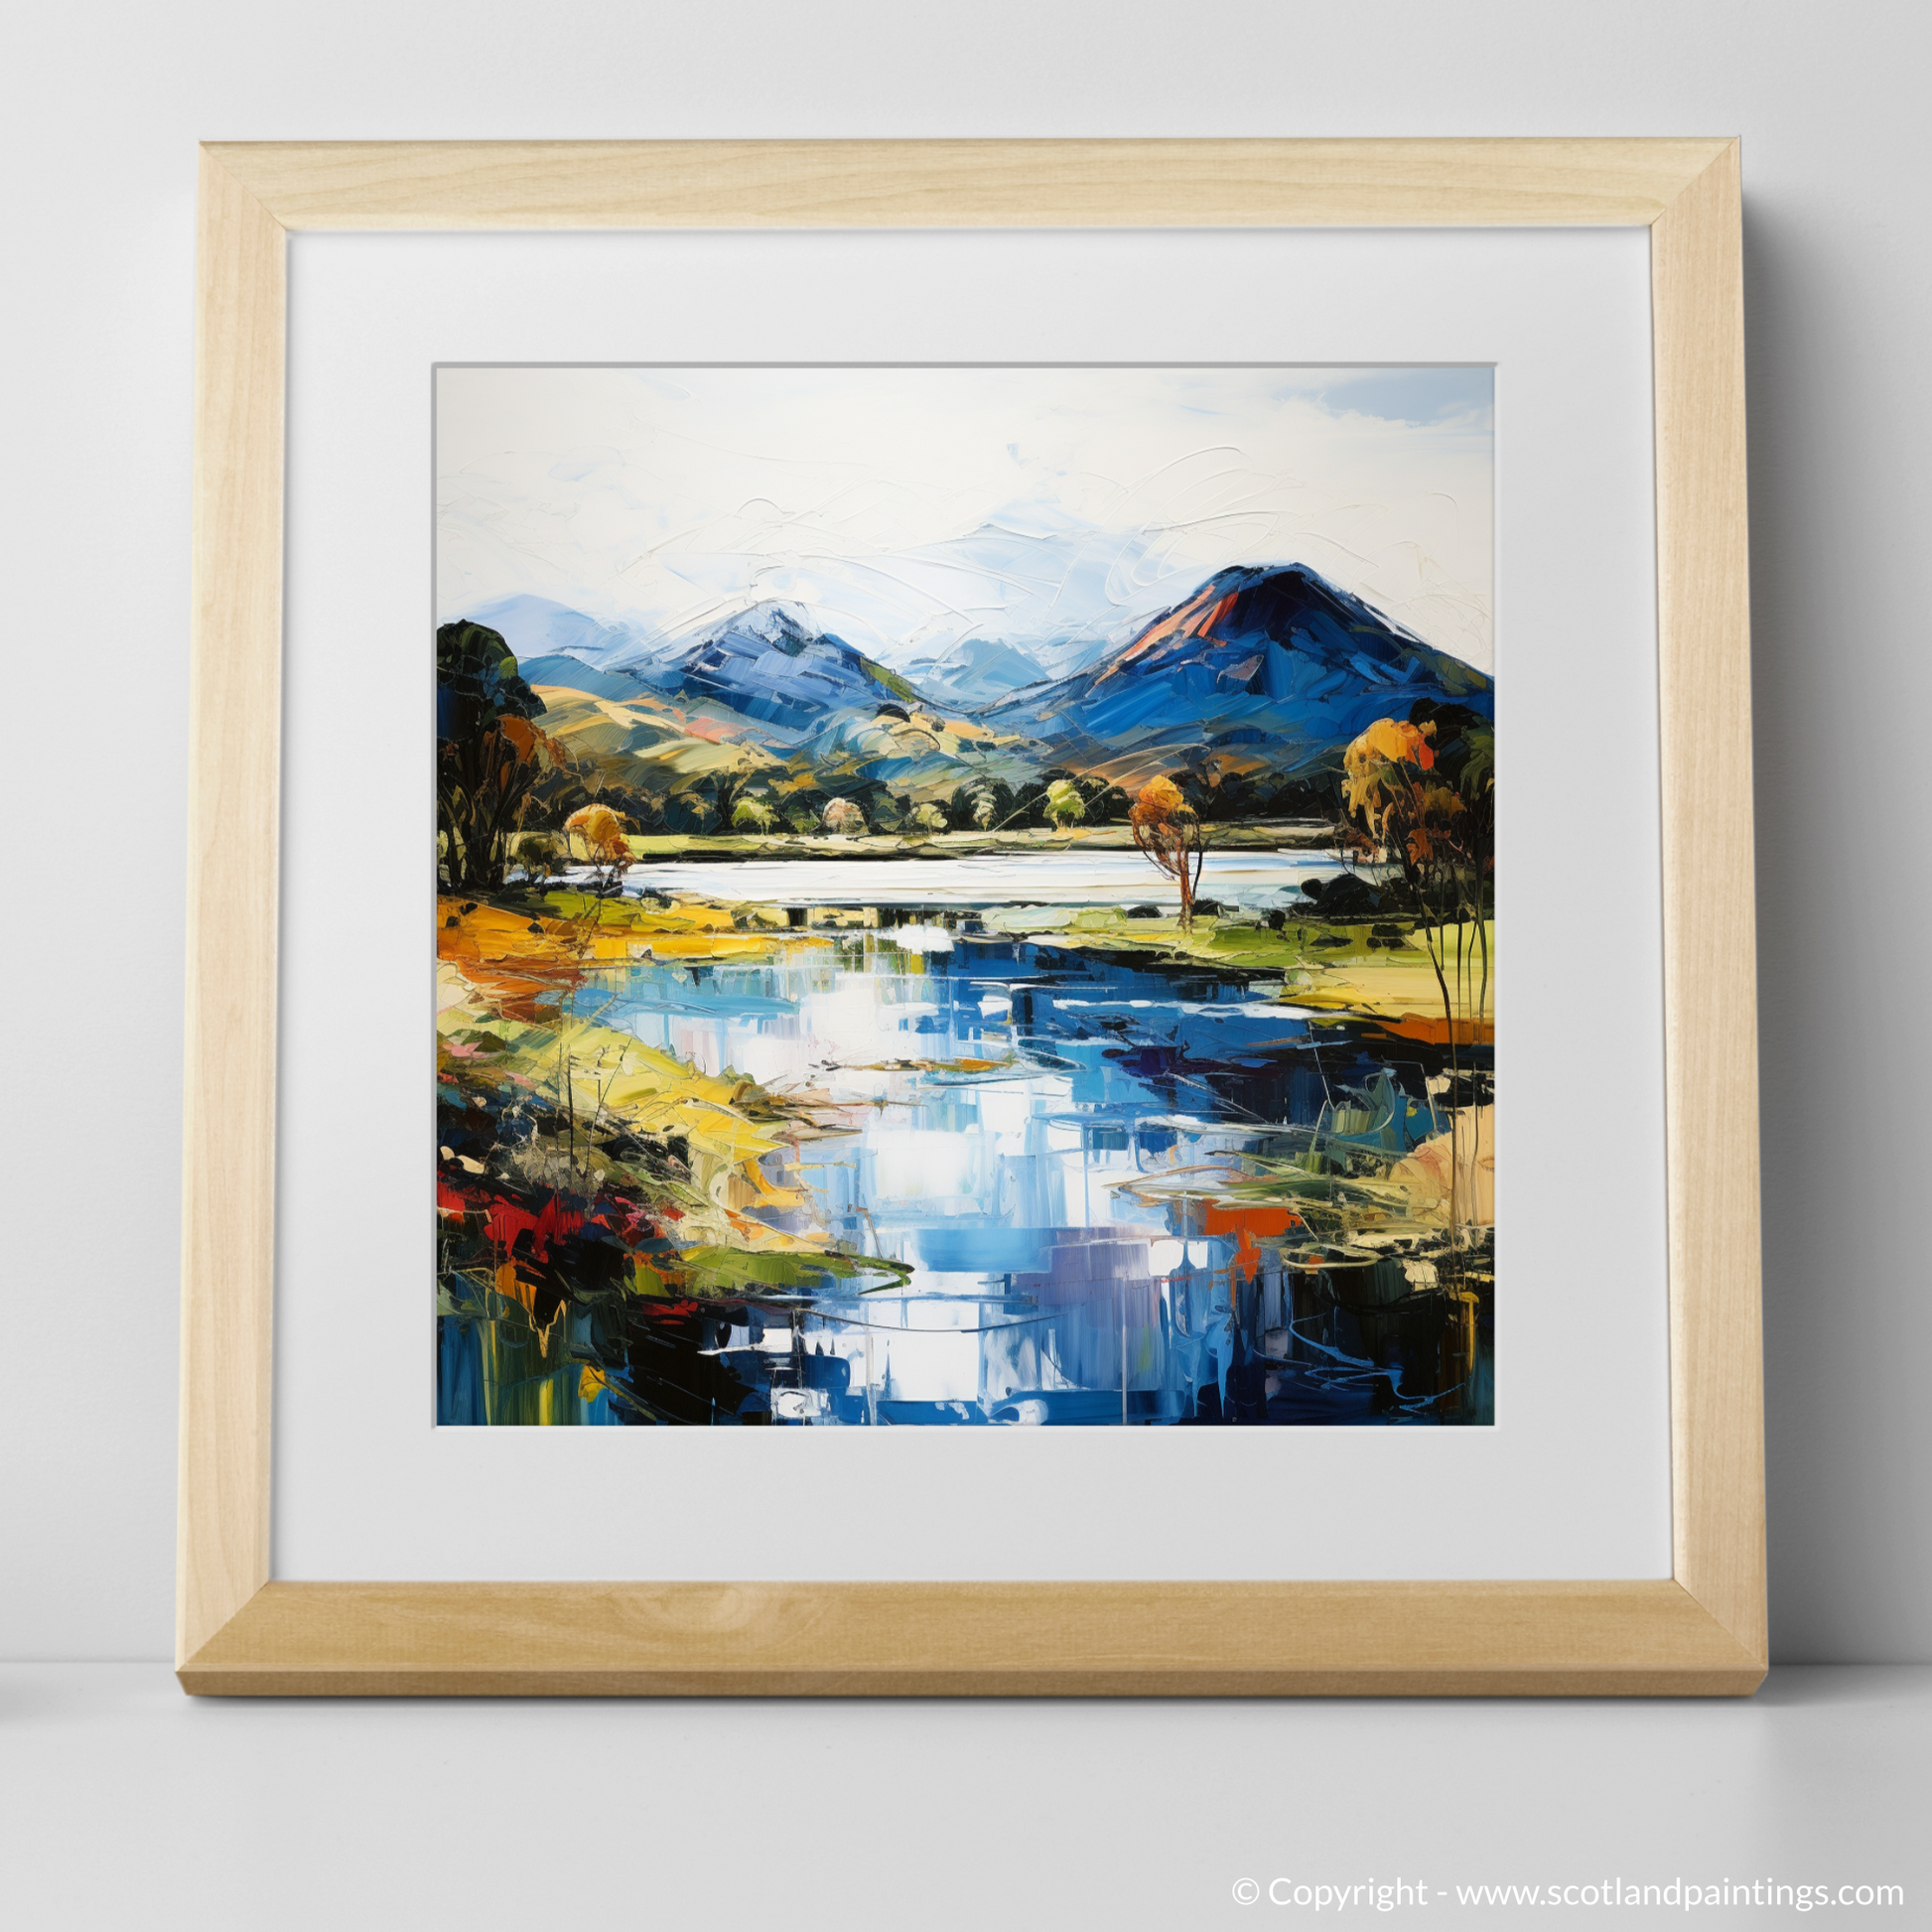 Art Print of Loch Ard, Stirling with a natural frame